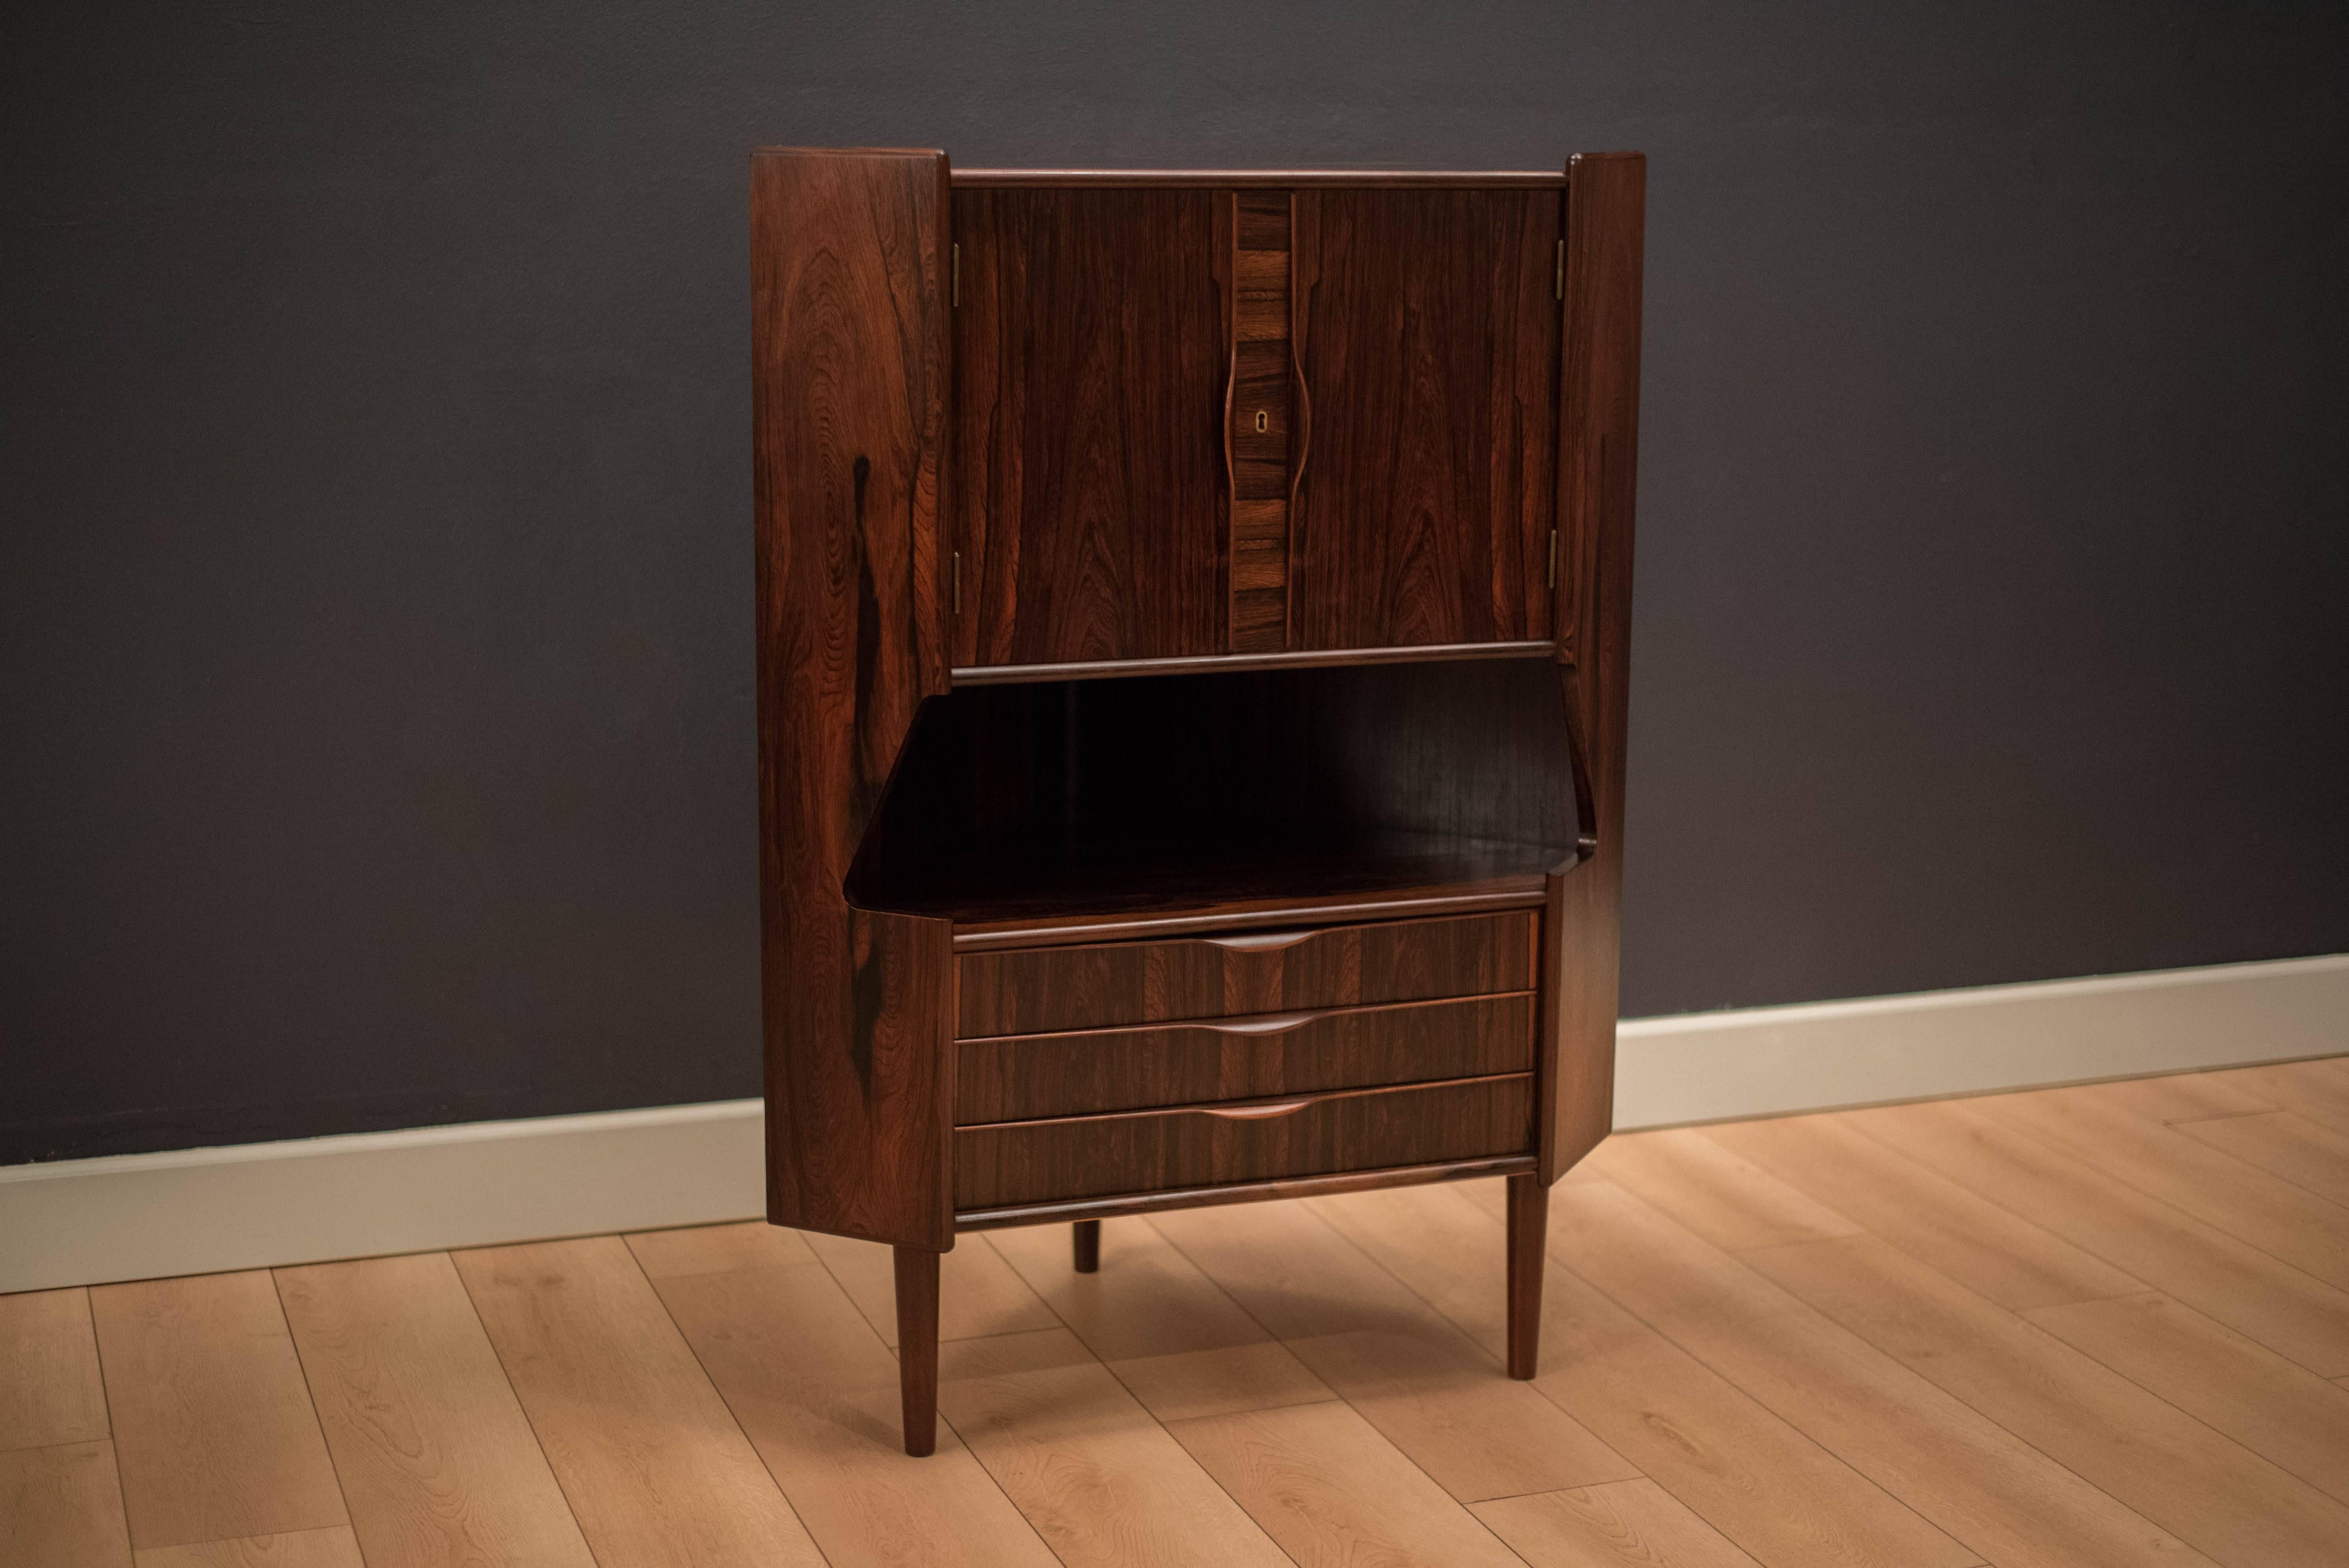 Mid-Century rosewood corner bar cabinet designed by Gunni Omann. This piece features three sculpted drawers with two doors that reveal open bar storage. Perfect solution for small spaces. Includes skeleton key.

Measures: 24.5